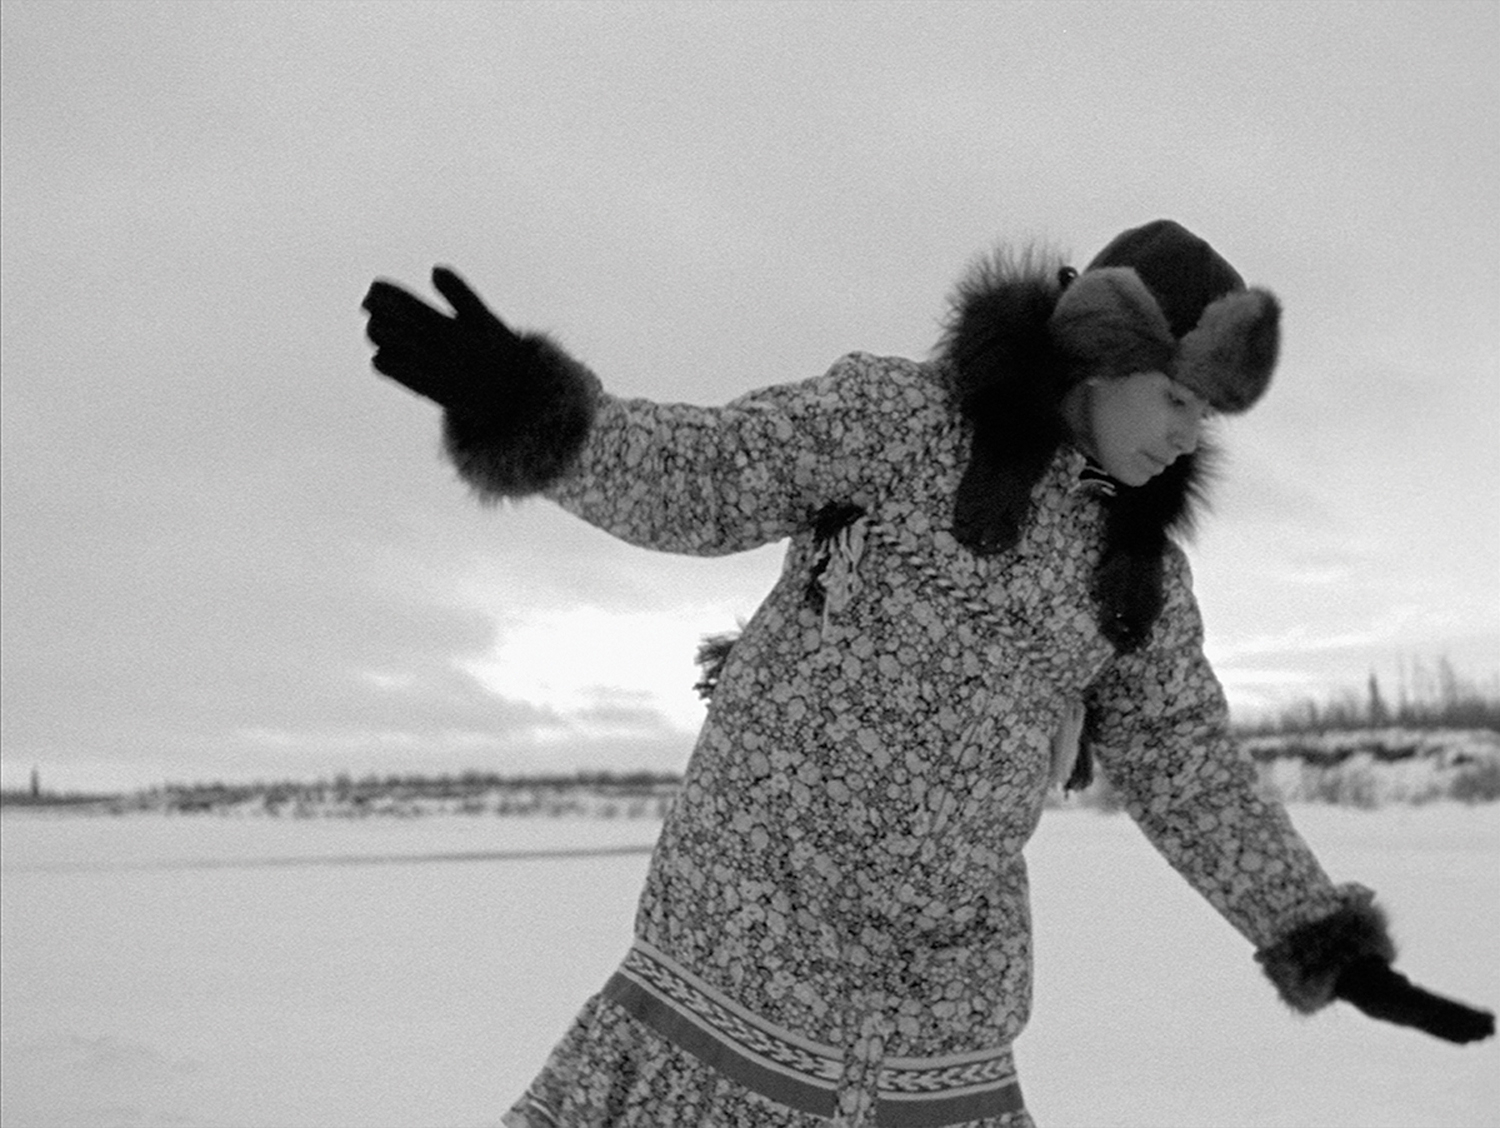     NFB Archives, The Herd, 1998. Film still from Michelle Latimer’s 
, Nimmikaage (She Dances for People), from the series Souvenir, 2015 © National Film Board of Canada.

